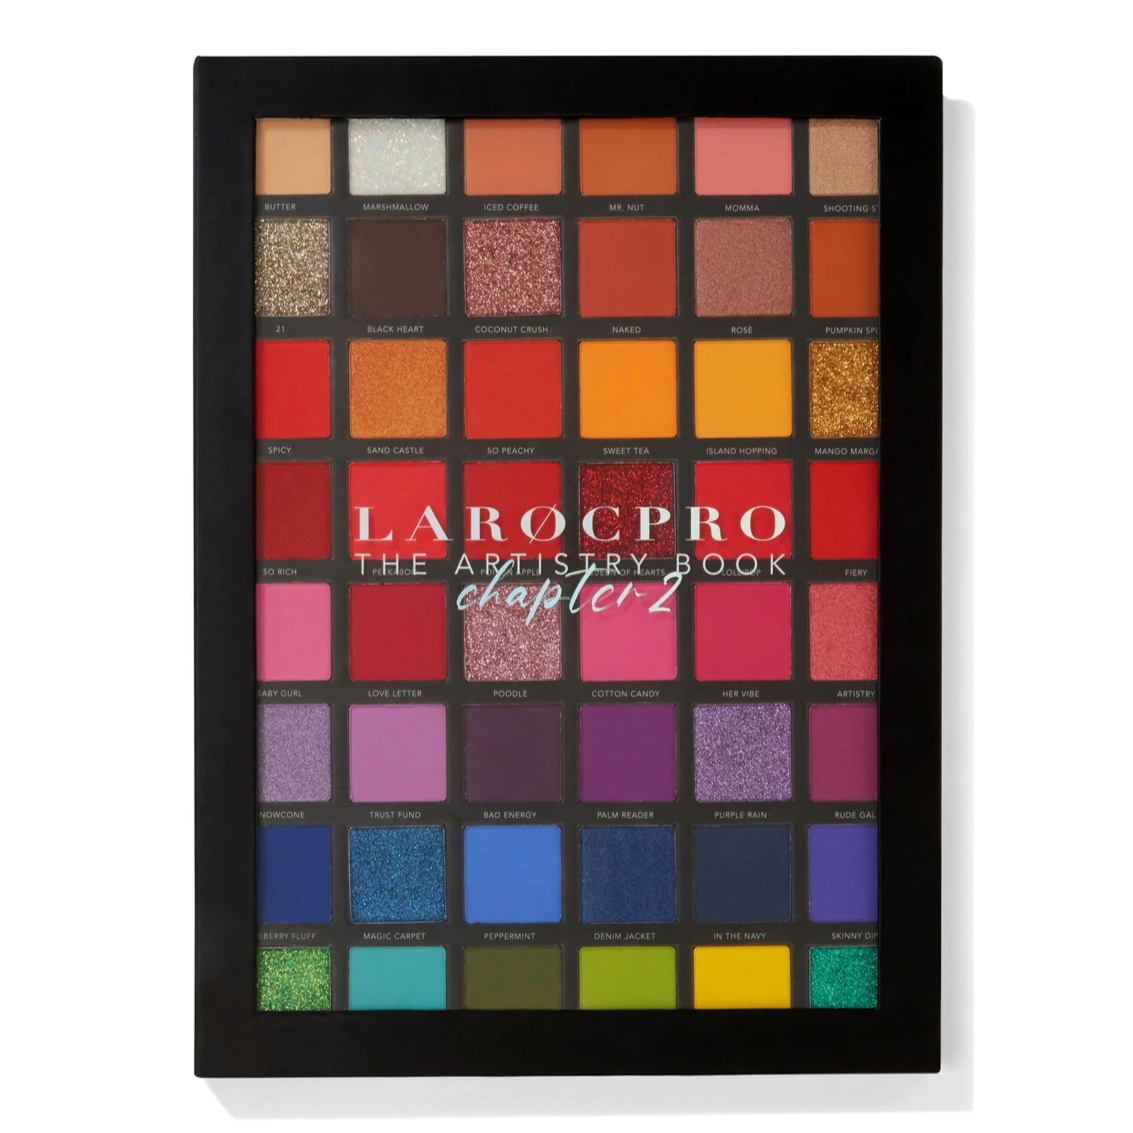 LaRoc PRO The Artistry Book - Chapter 2, lid closed